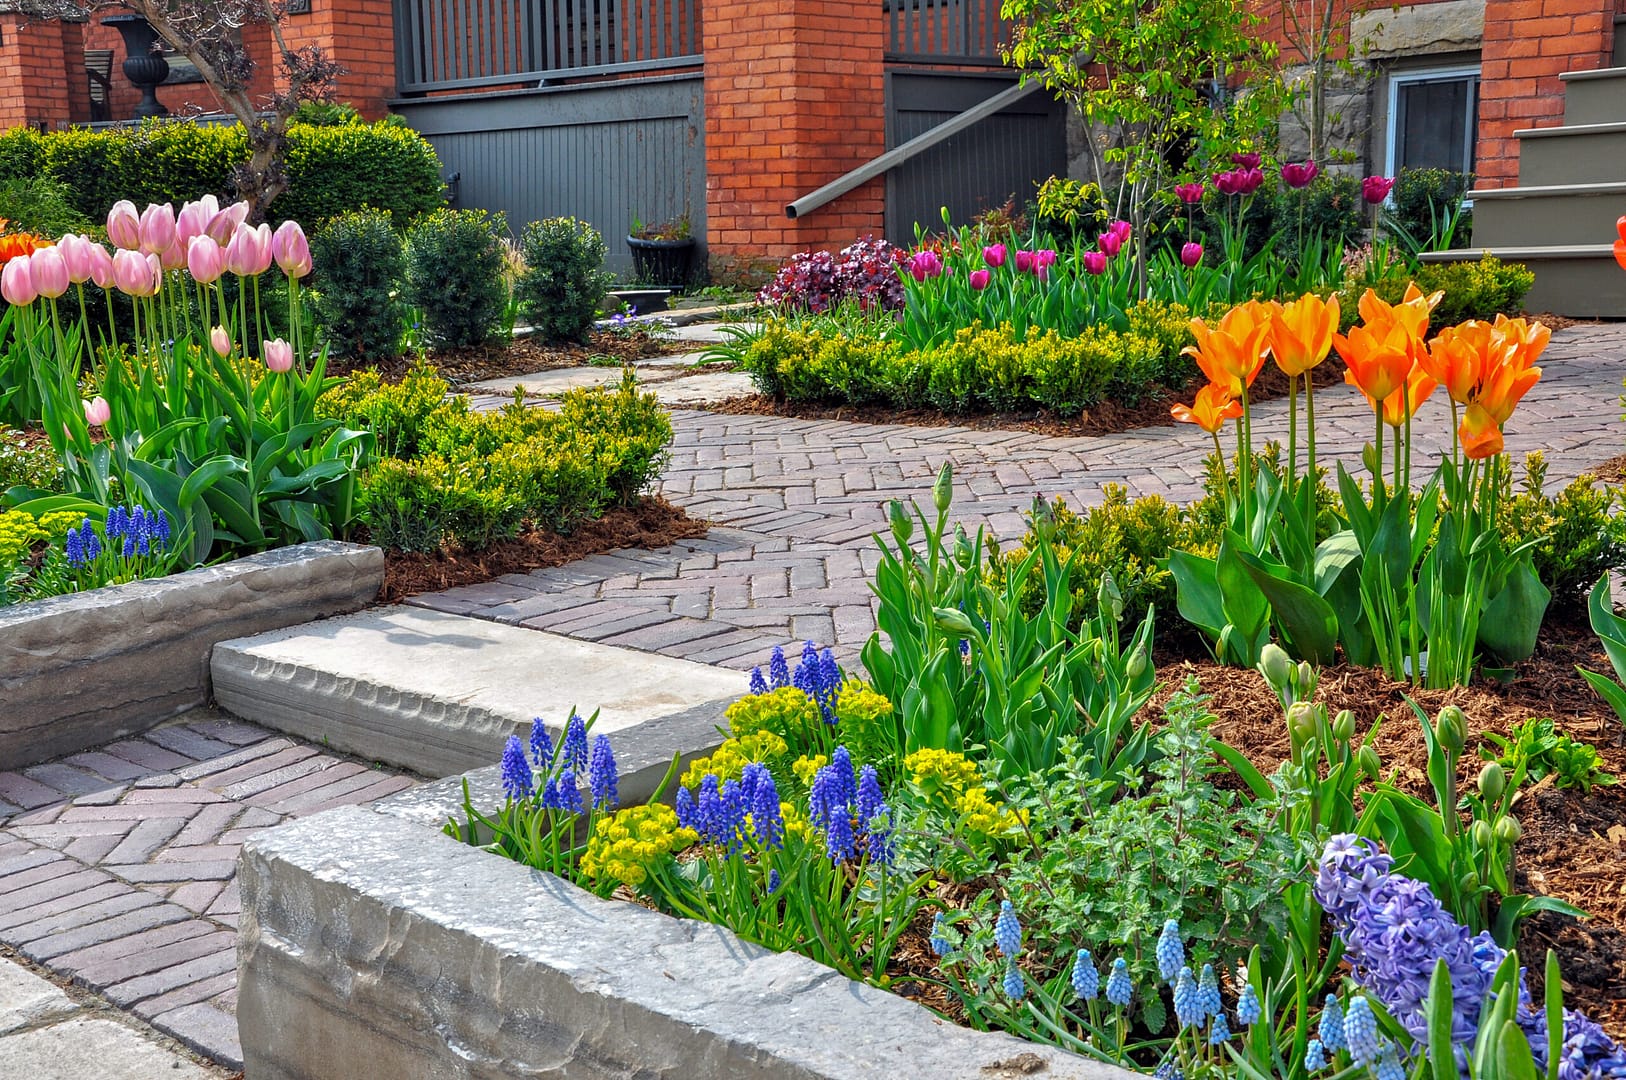 An inviting urban front yard spring garden with a spacious veranda, a charming brick paver walkway, and a well-designed retaining wall adorned with an array of colorful bulbs, lush shrubs, and vibrant perennials, offering a delightful blend of textures and colors